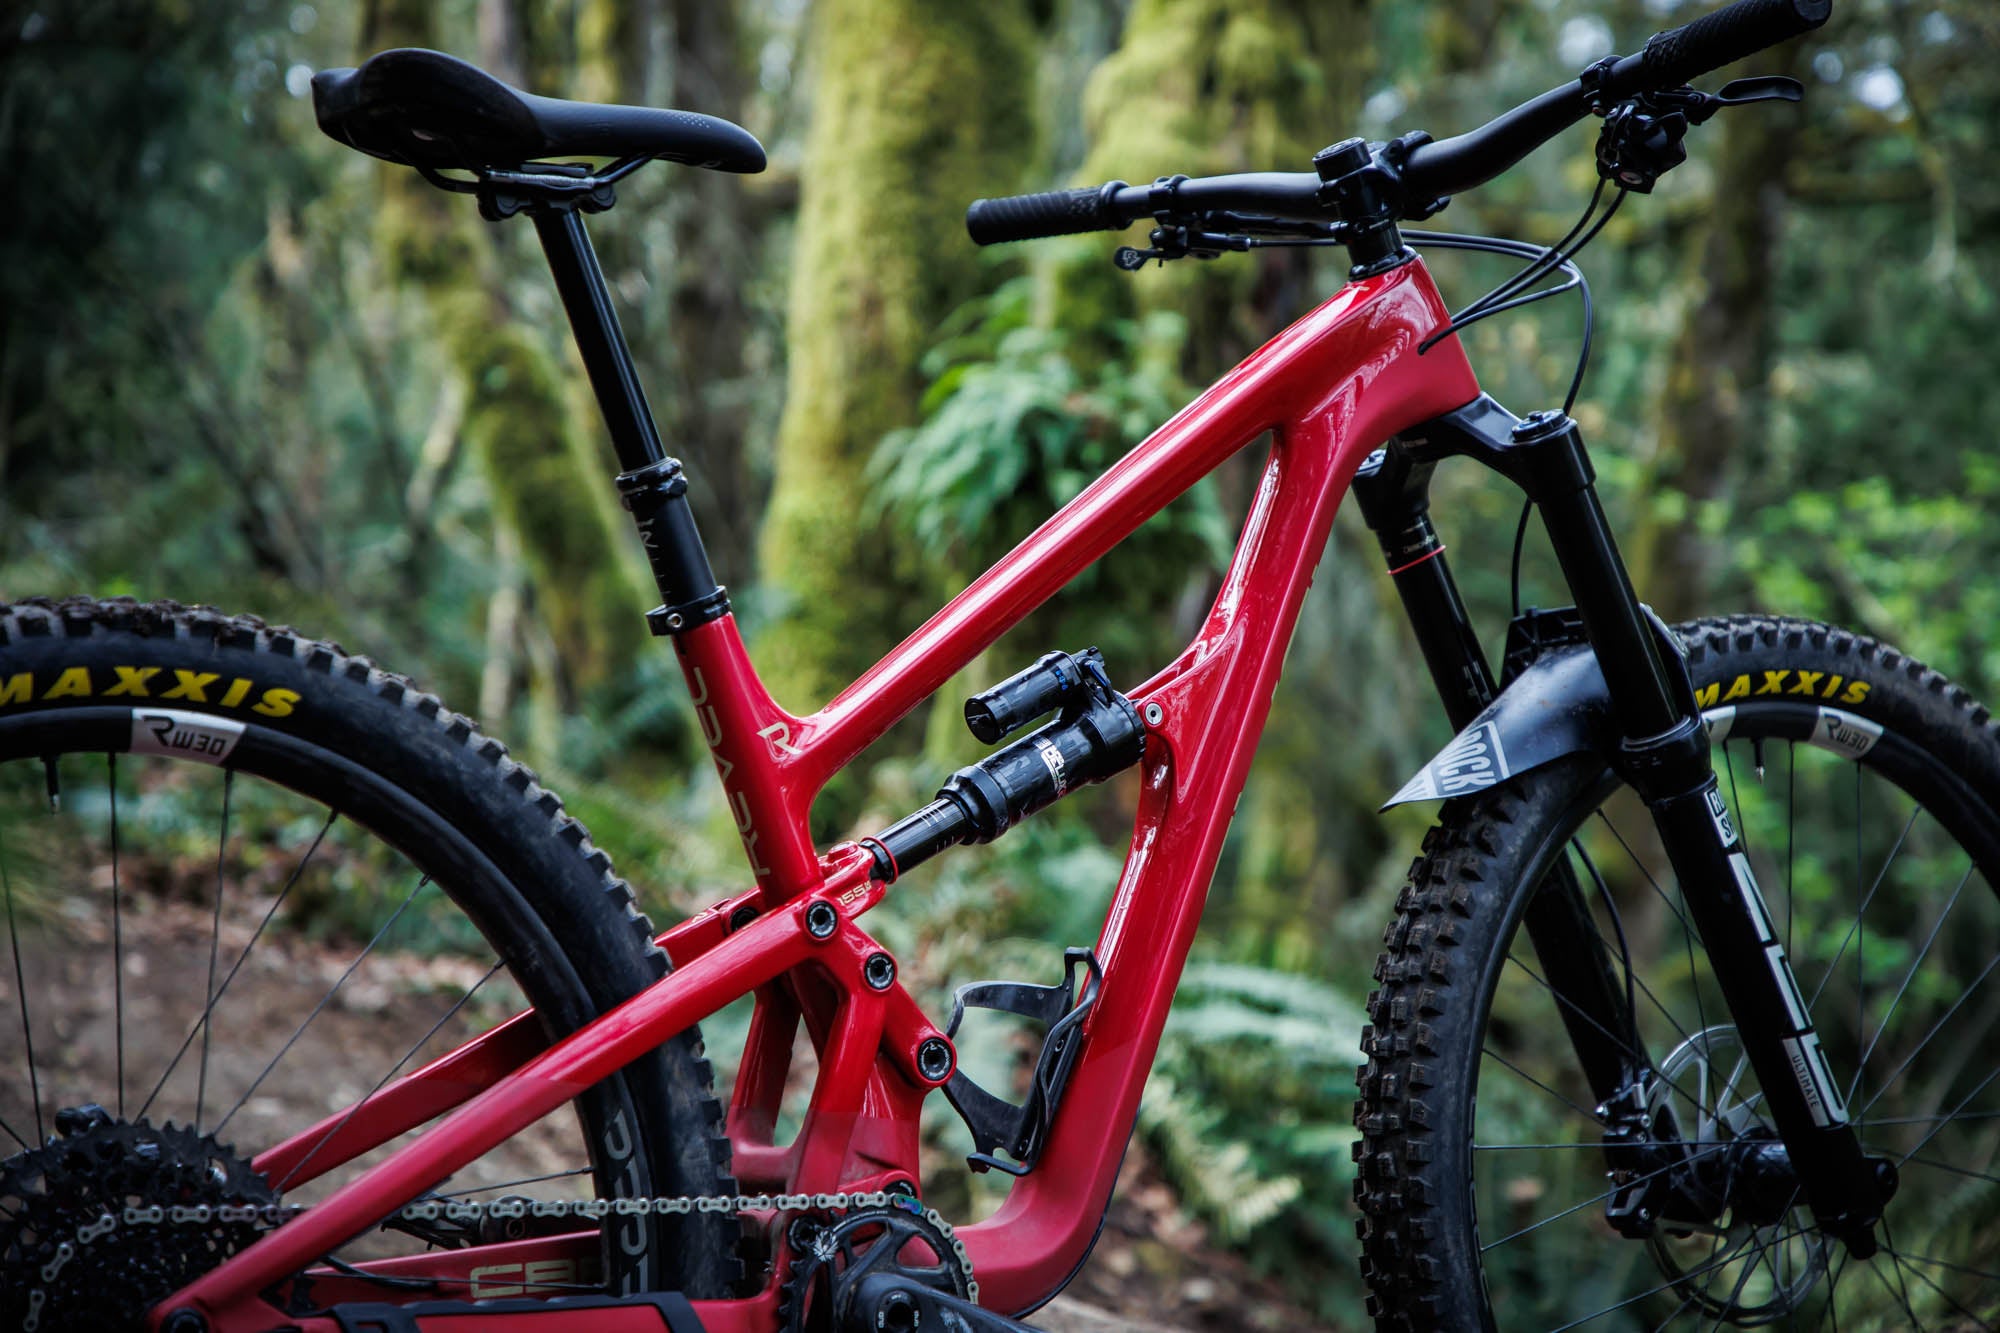 The Revel Rail29 is the every-rider bike. It's amazing.